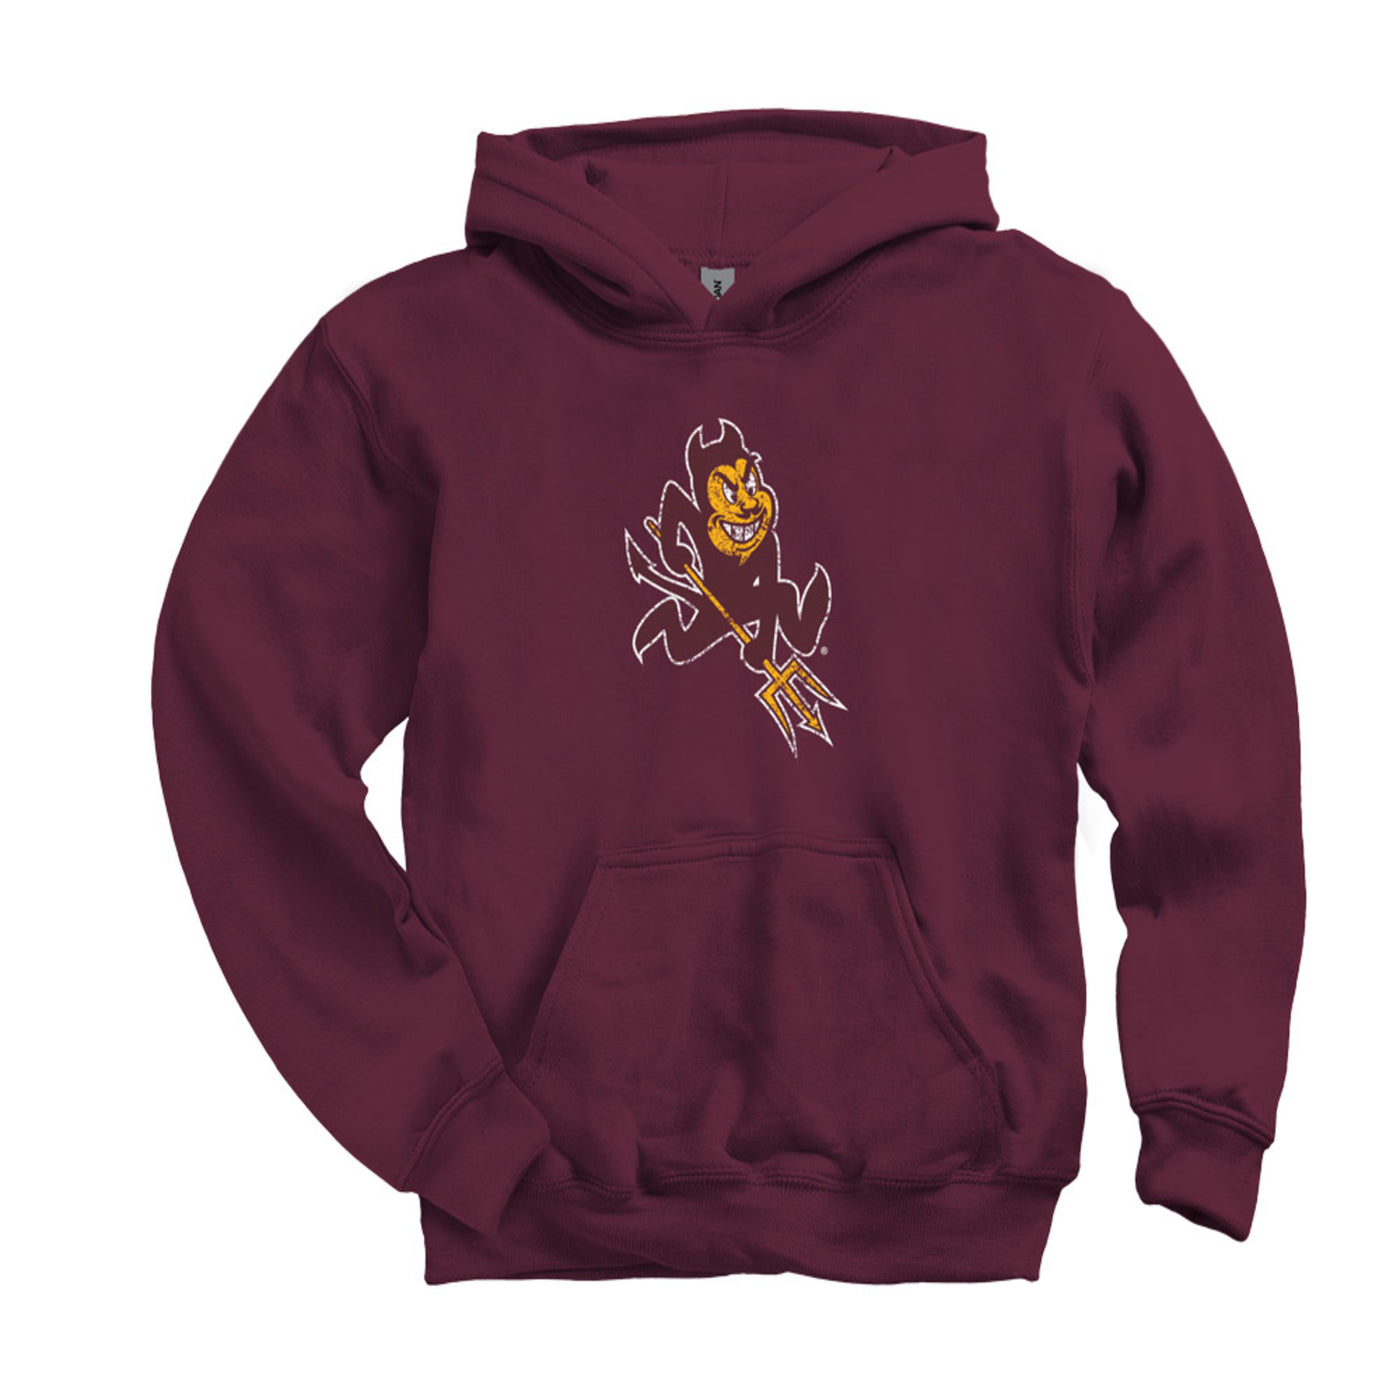 ASU maroon youth hoodie with the sparky mascot on the front.